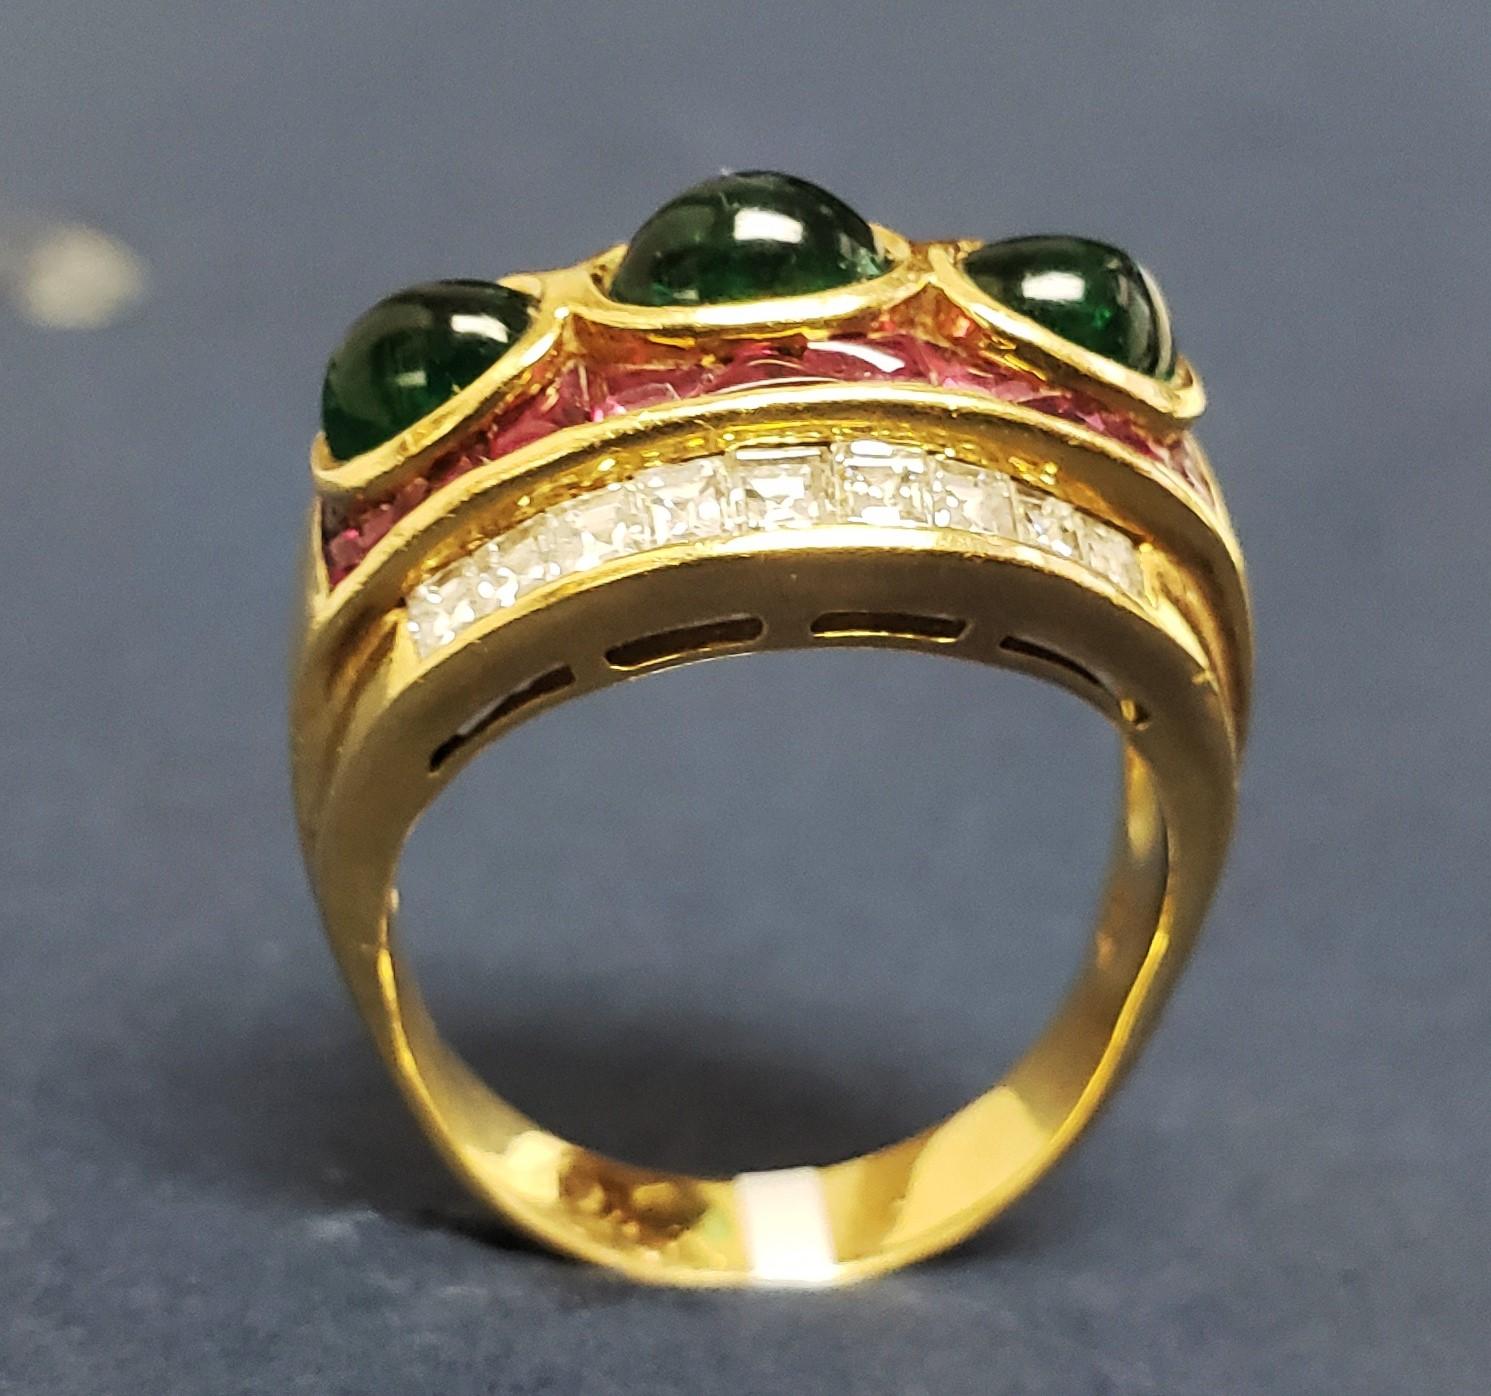 Cabochon Vintage Diamonds, Rubies & Emerald cocktail ring/band 18K s-9 For Sale